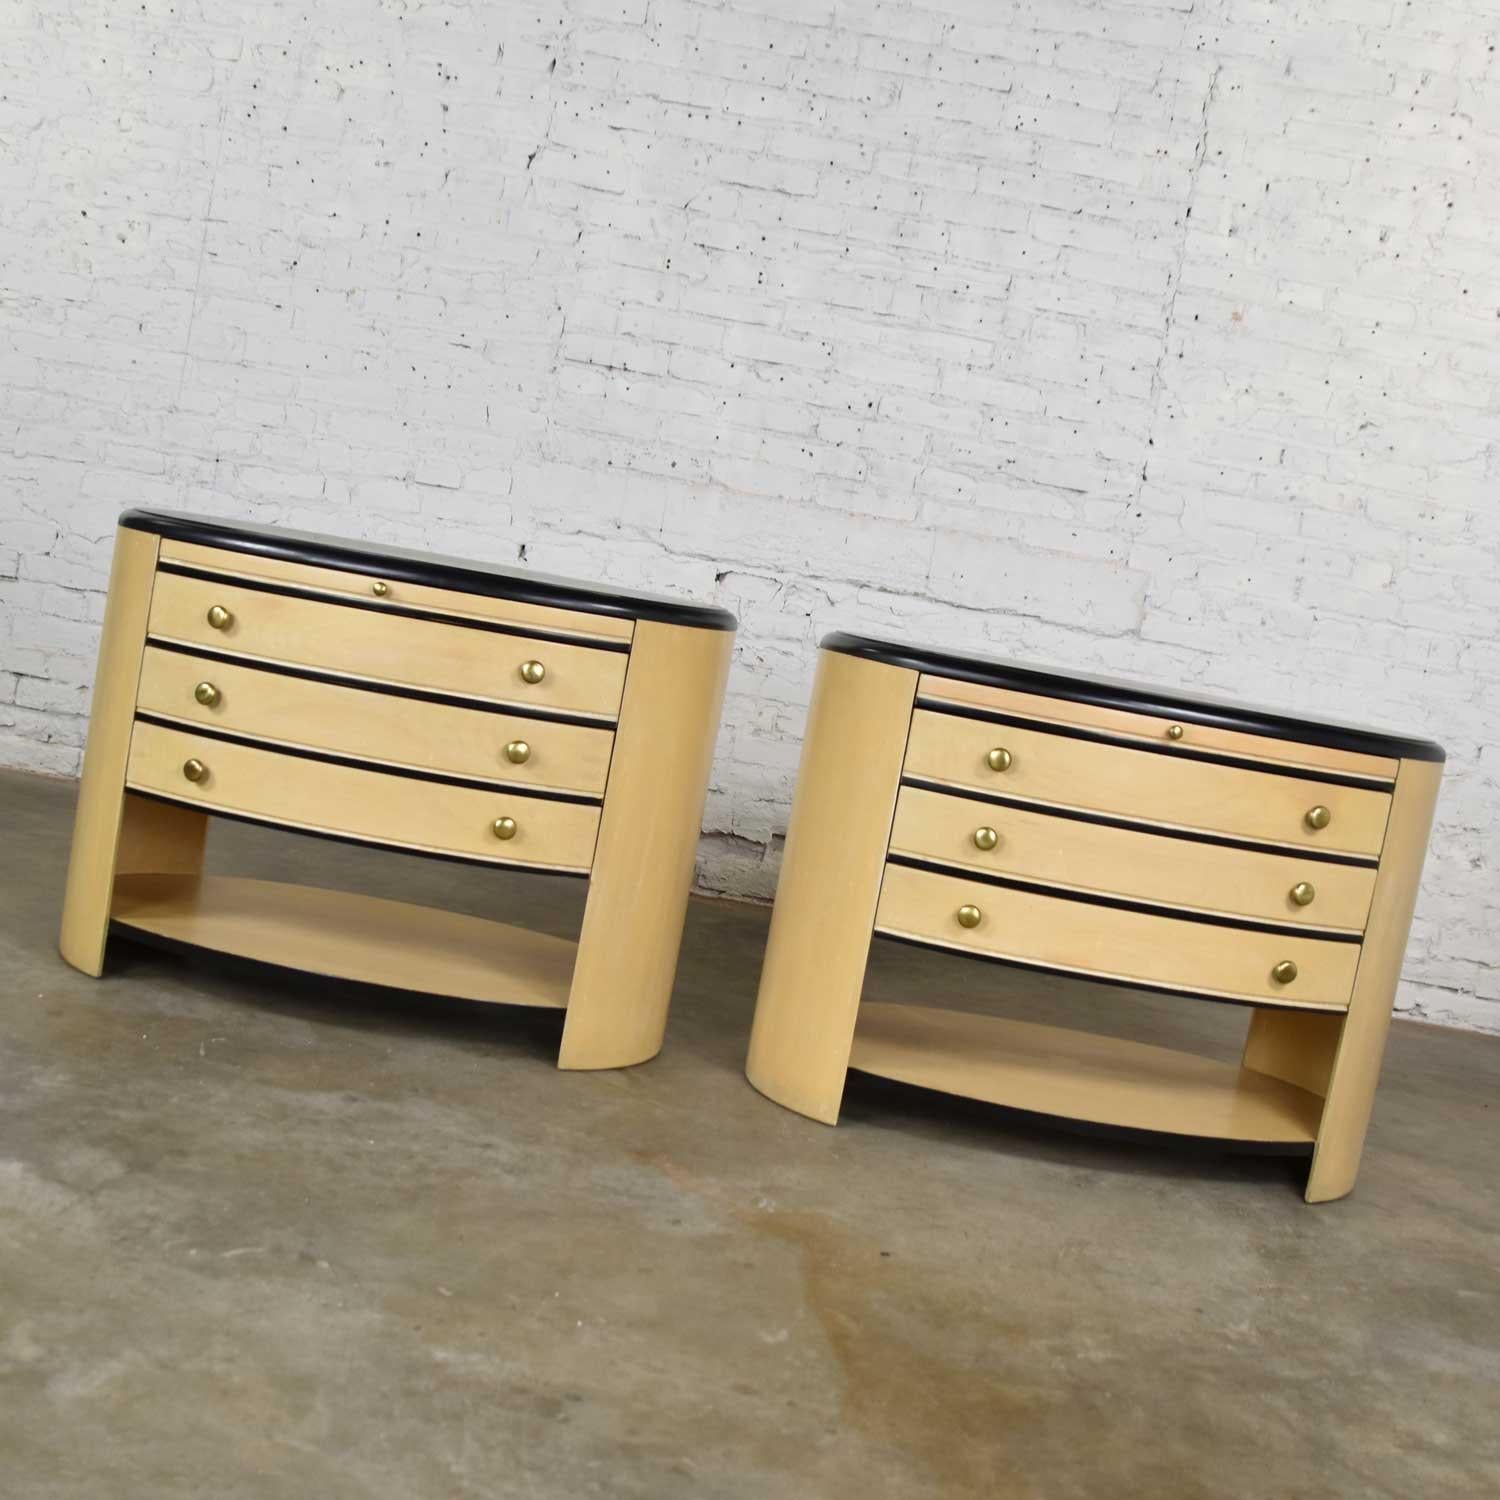 Handsome pair of modern oval nightstands or bedside cabinets in a blonde whitewash and black finish. They are in wonderful condition. We have restored the black top. There may still be signs of age appropriate wear but nothing outstanding. There is